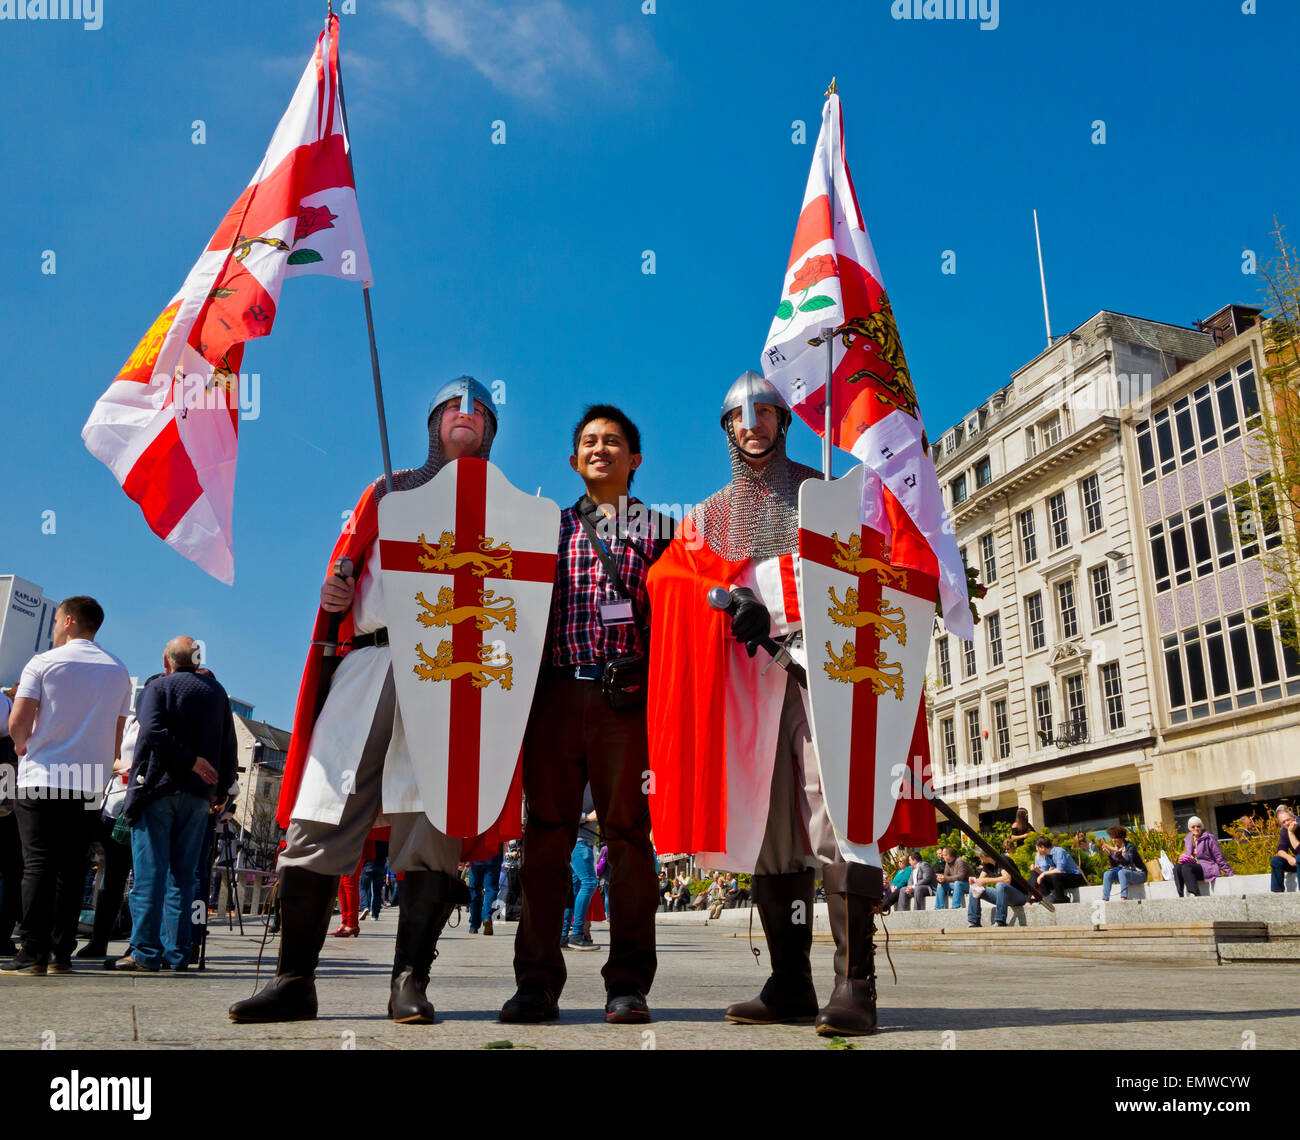 Nottingham, UK. 23rd April, 2015. Nottingham St George's Day Awareness Parade 2015. Patriots marched through the city centre to celebrate England's National Day in an event organised by the Royal Society of St George. Stock Photo